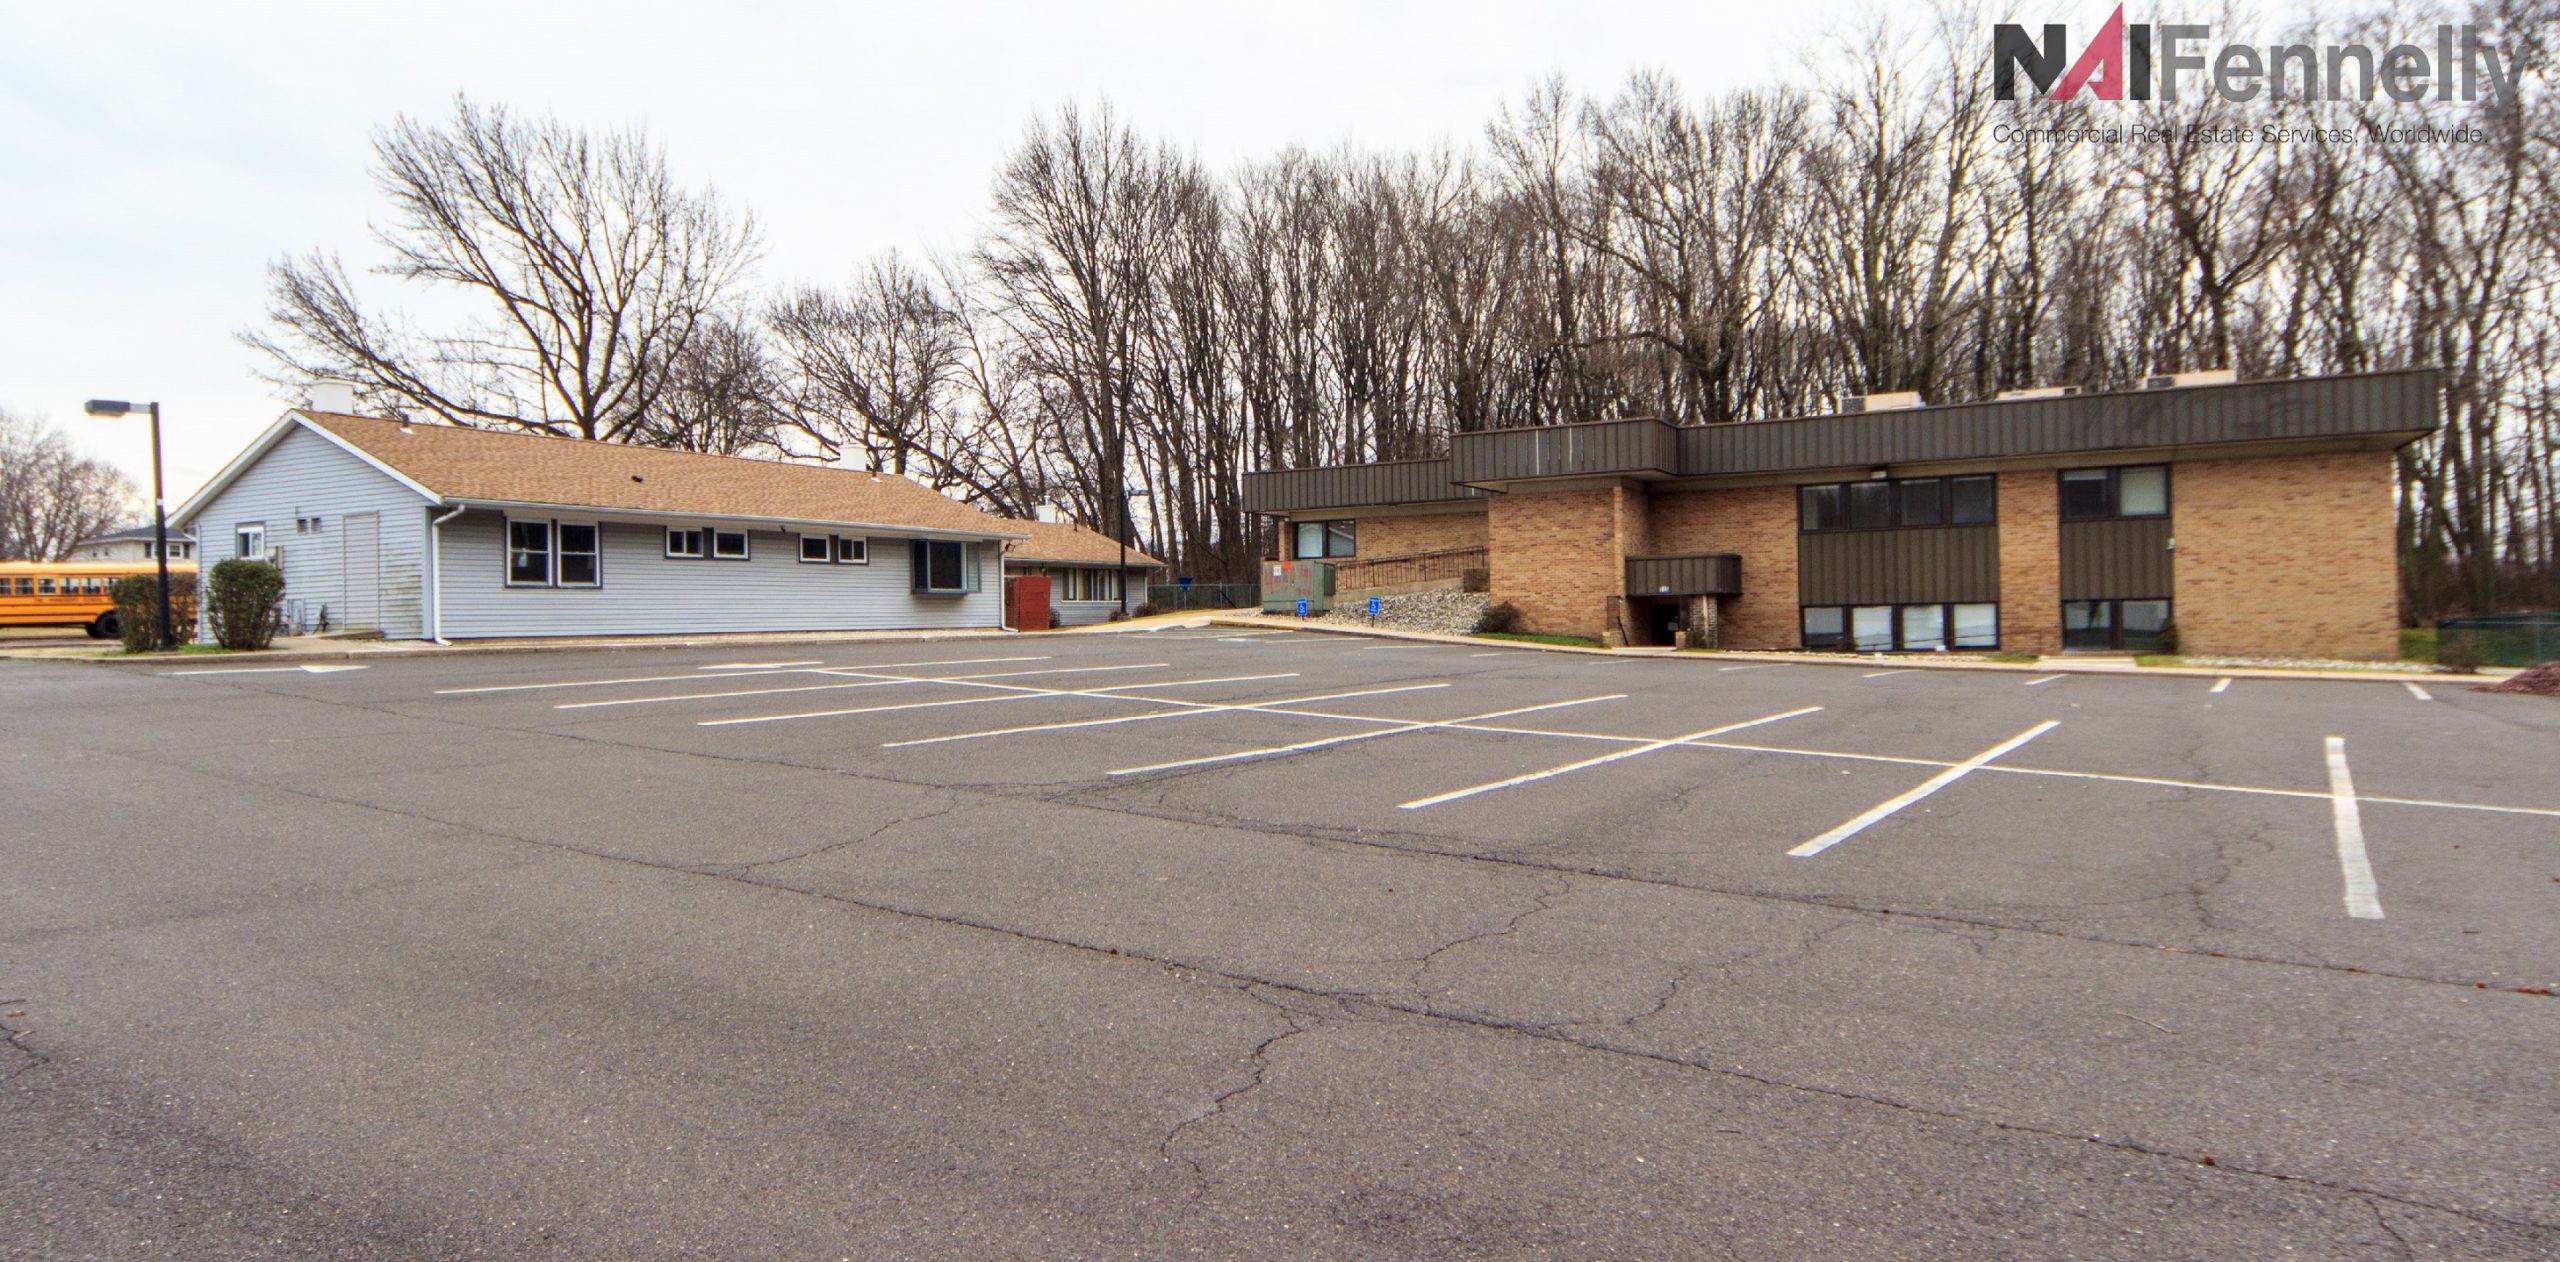 Fennelly Negotiates $950,000 Sale of 16,000-Square-Foot Daycare Facility in Fairless Hills, Pa.